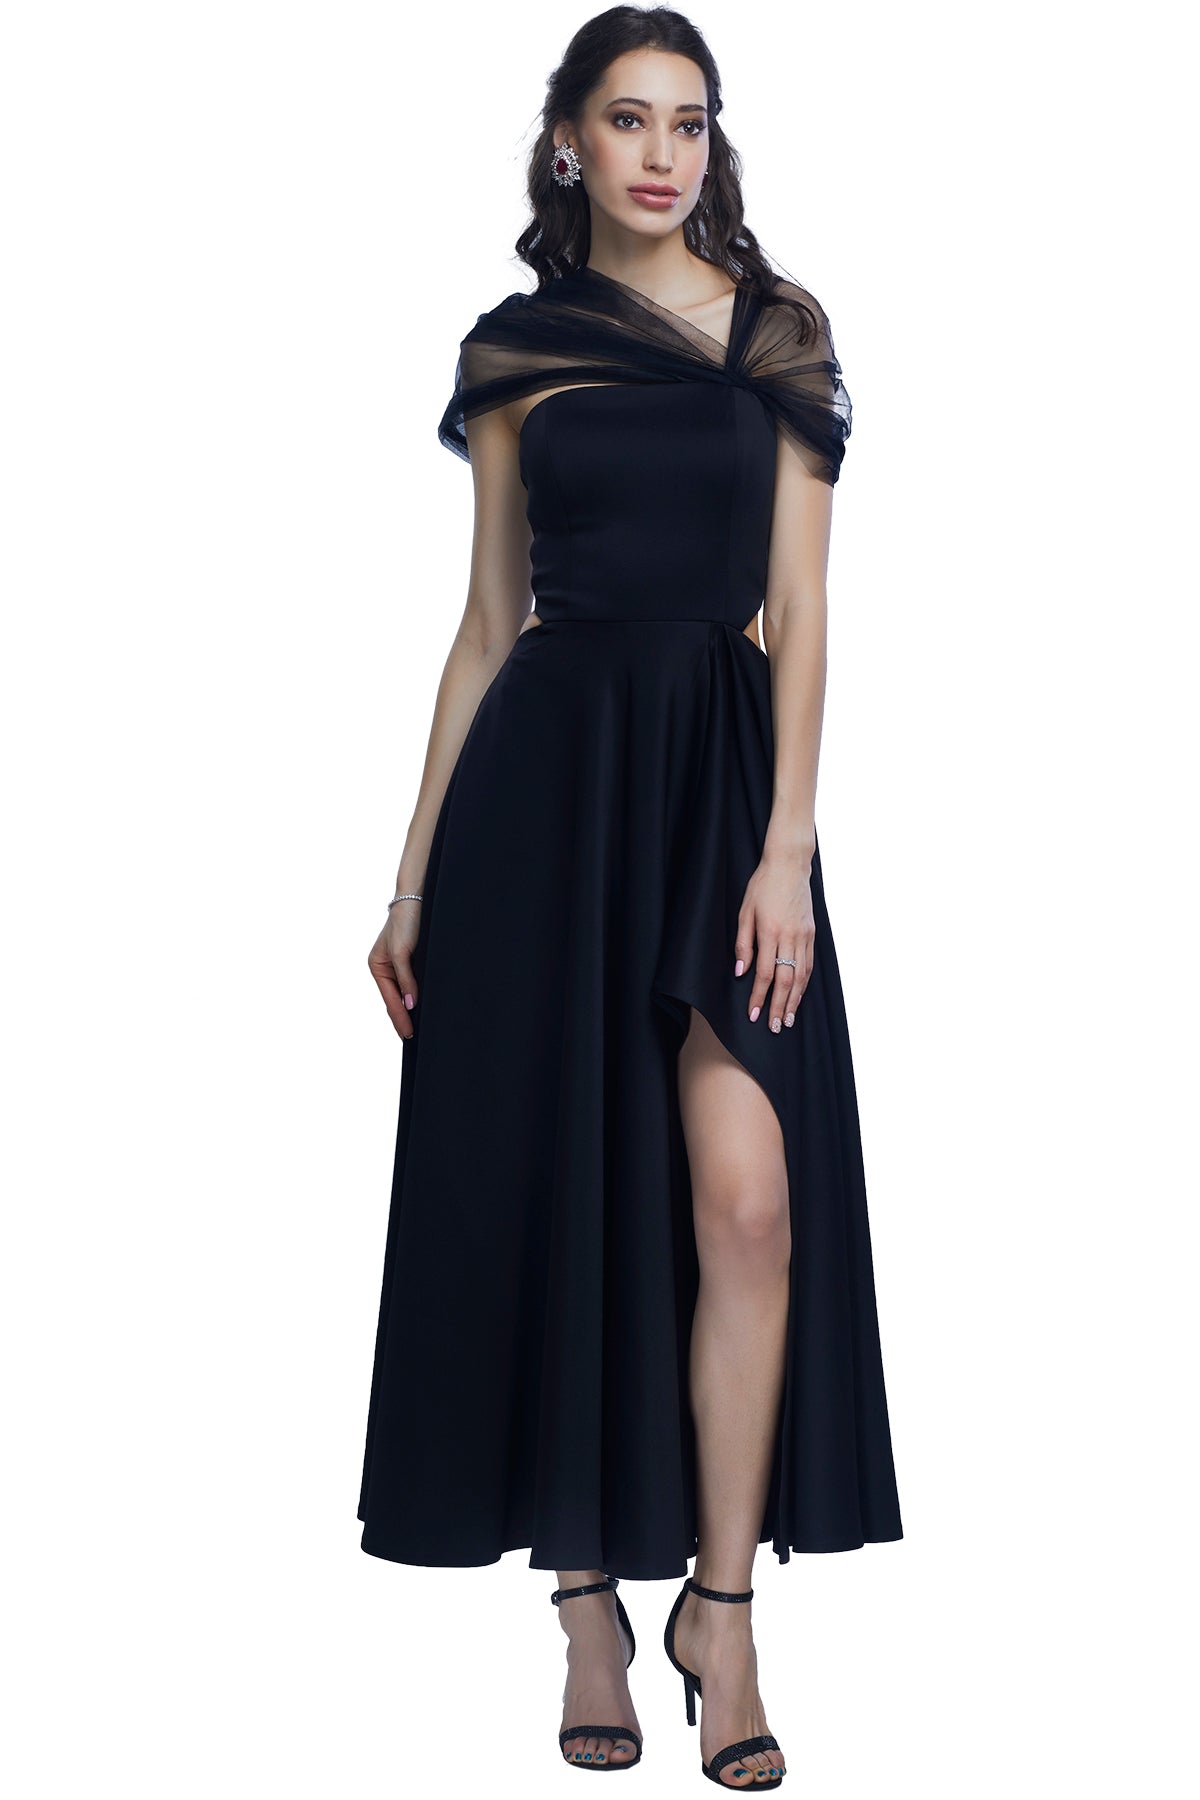 Black gown in scuba fabric with a high front side slit and net off shoulder drape.